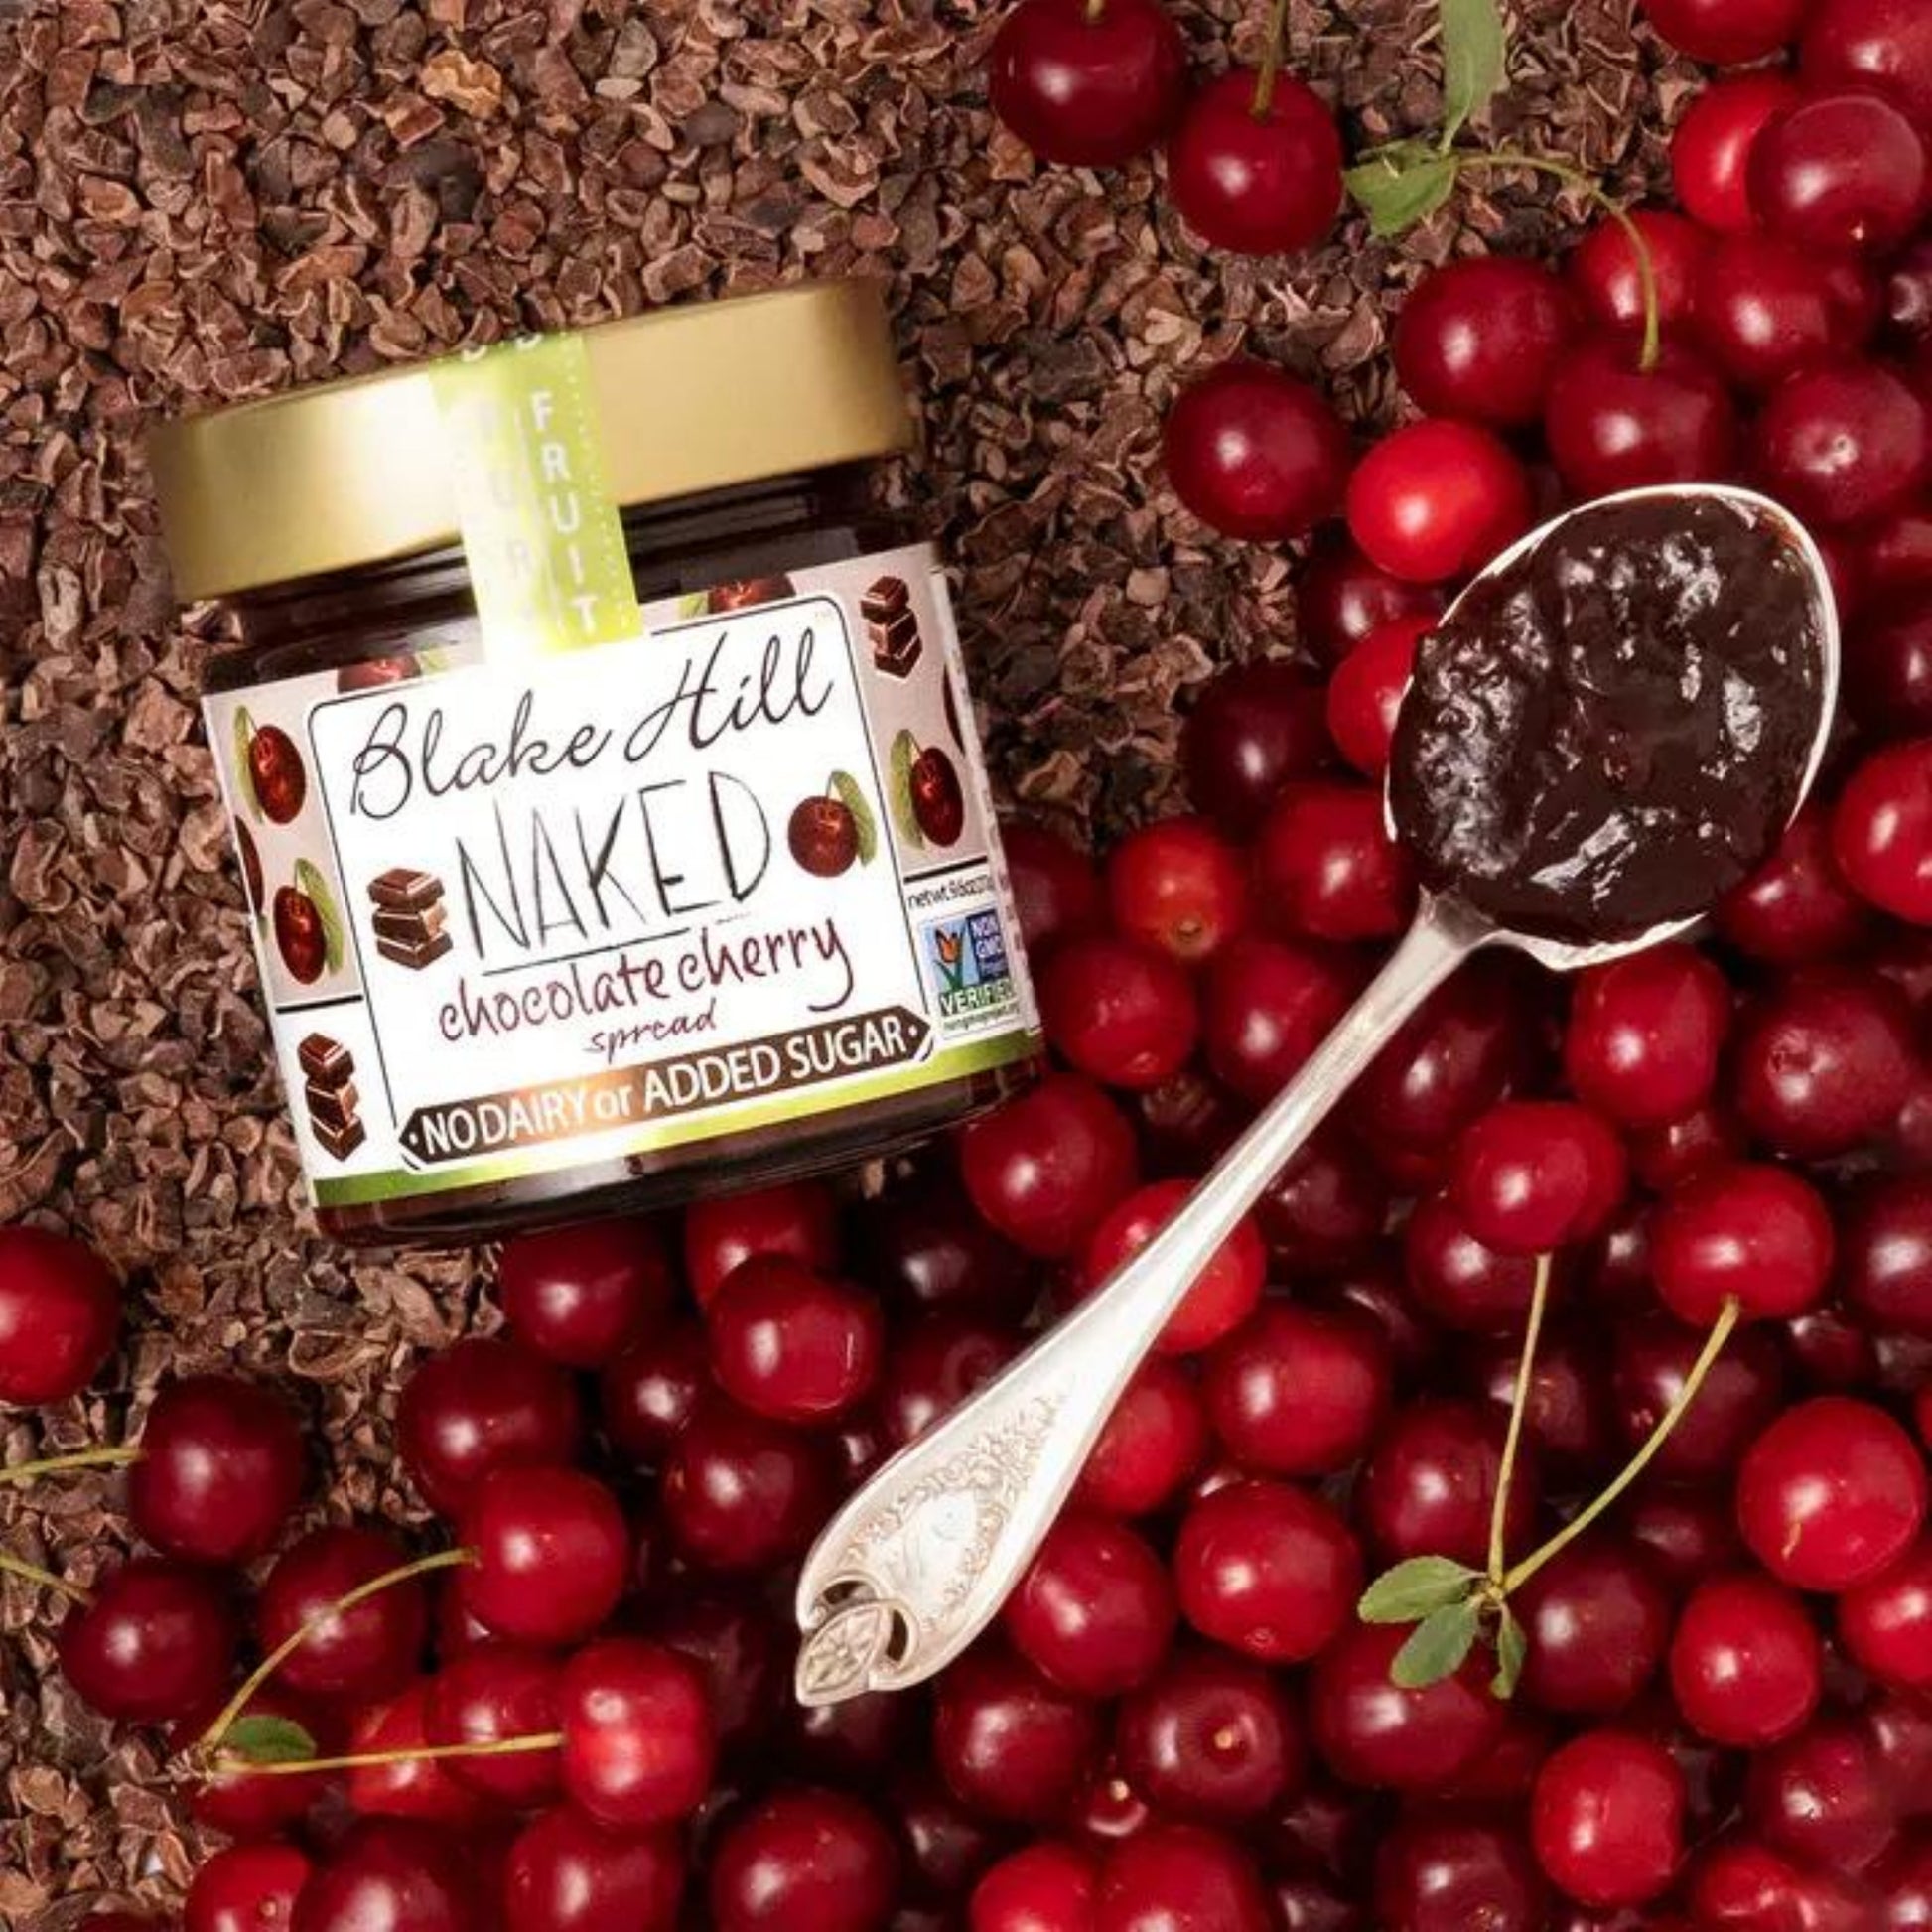 Naked Chocolate Cherry Spread (No Dairy or Added Sugar) Lifestyle